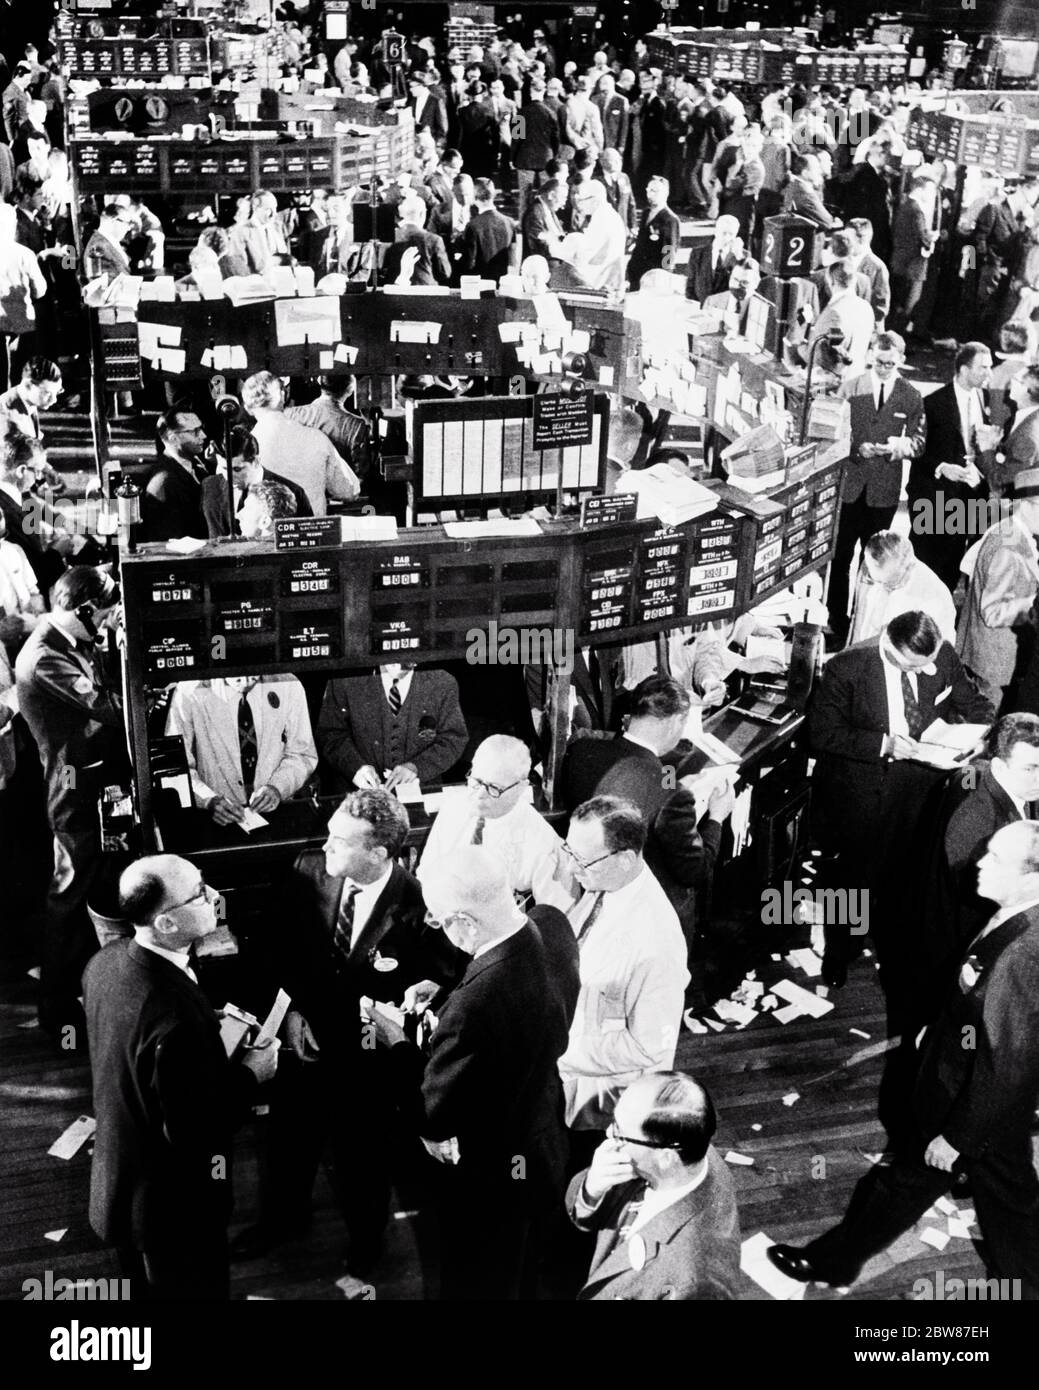 1950s ANONYMOUS MEN BUSINESSMEN BROKERS TRADERS ACTIVE ON FLOOR OF NEW YORK STOCK EXCHANGE NEW YORK CITY NY USA - asp jo8408 ASP001 HARS PERSONS UNITED STATES OF AMERICA MALES RISK B&W FINANCIAL GATHERING FREEDOM DREAMS SELLING HIGH ANGLE STRATEGY CUSTOMER SERVICE NETWORKING POWERFUL OPPORTUNITY MASCULINE NYC OCCUPATIONS STOCKS BUYERS MOTION BLUR TRADING BROKERS NEW YORK SECURITIES CITIES SELLERS NEW YORK CITY NO WOMEN ALL MEN THRONG WALL STREET ATTENDANCE BLACK AND WHITE CAUCASIAN ETHNICITY FINANCIAL DISTRICT OLD FASHIONED TRADERS Stock Photo